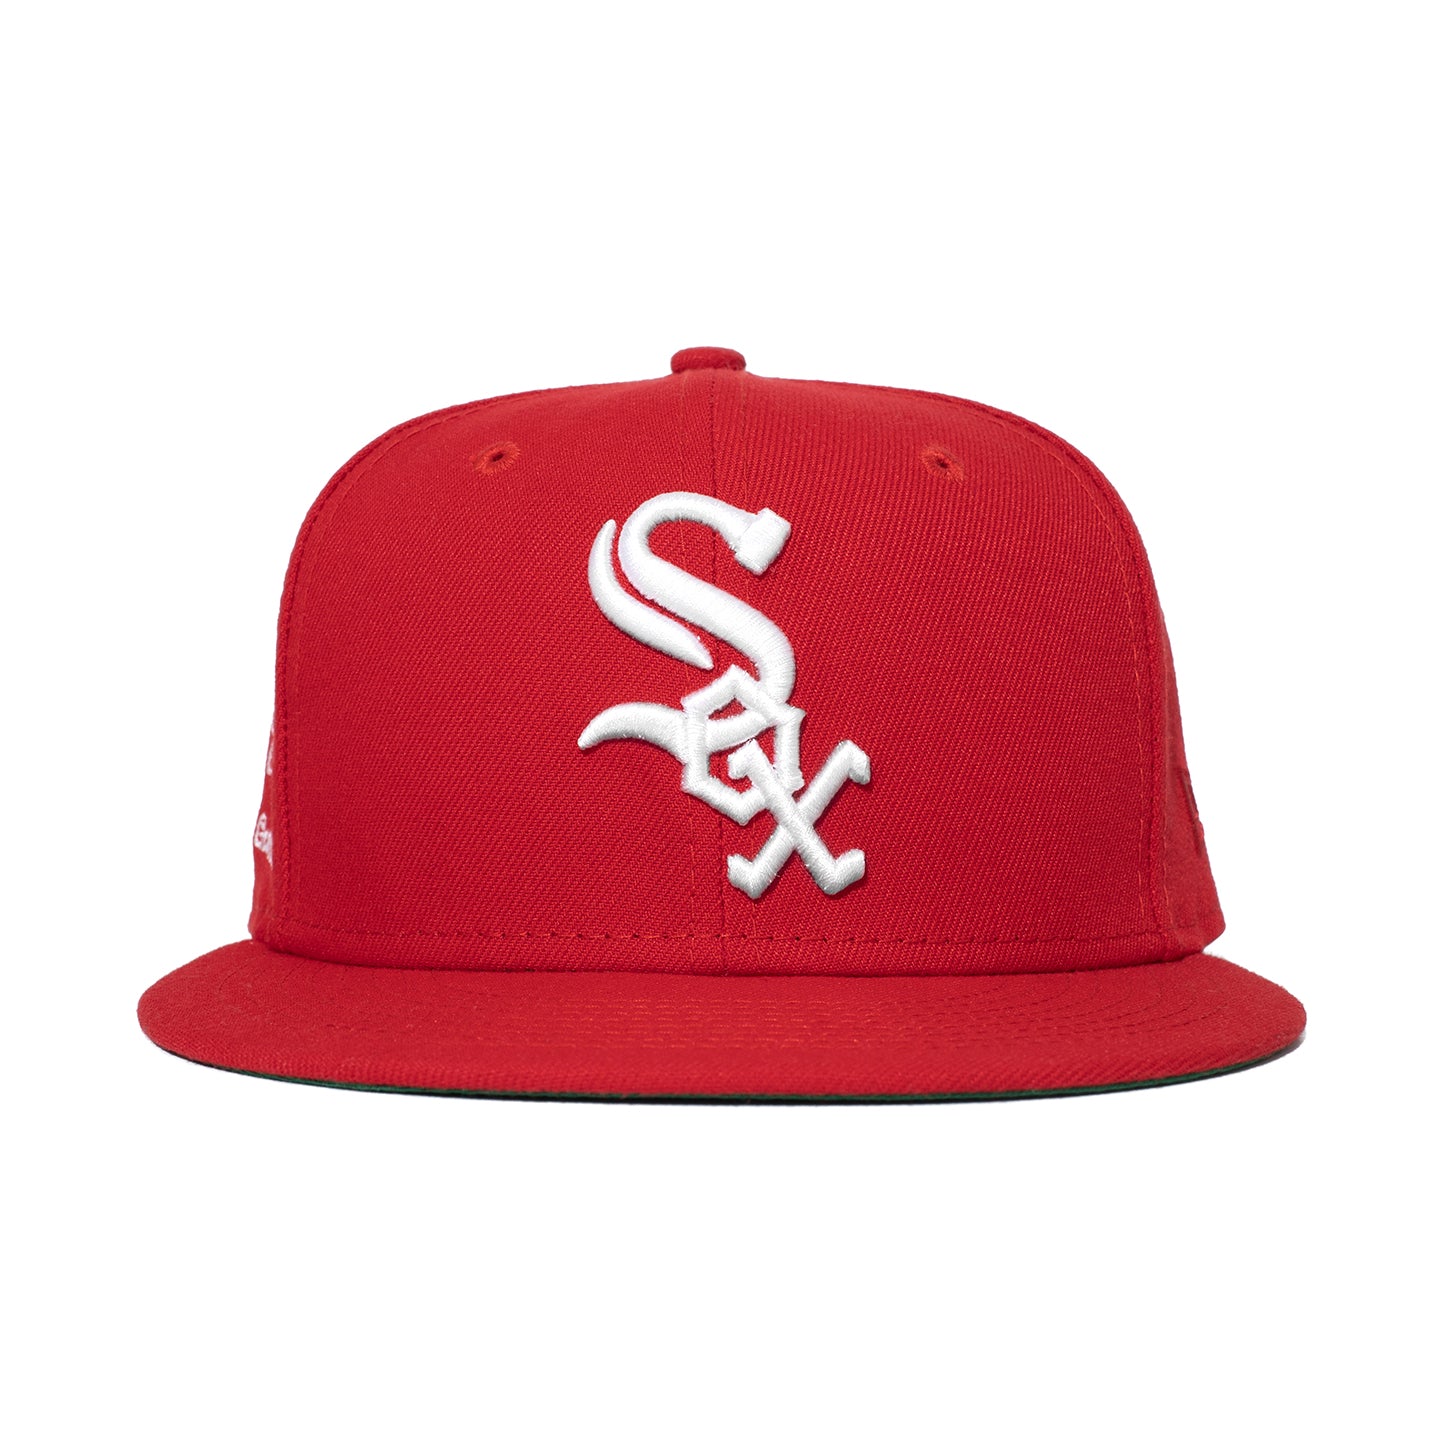 Chicago White Sox by JFG (RED)